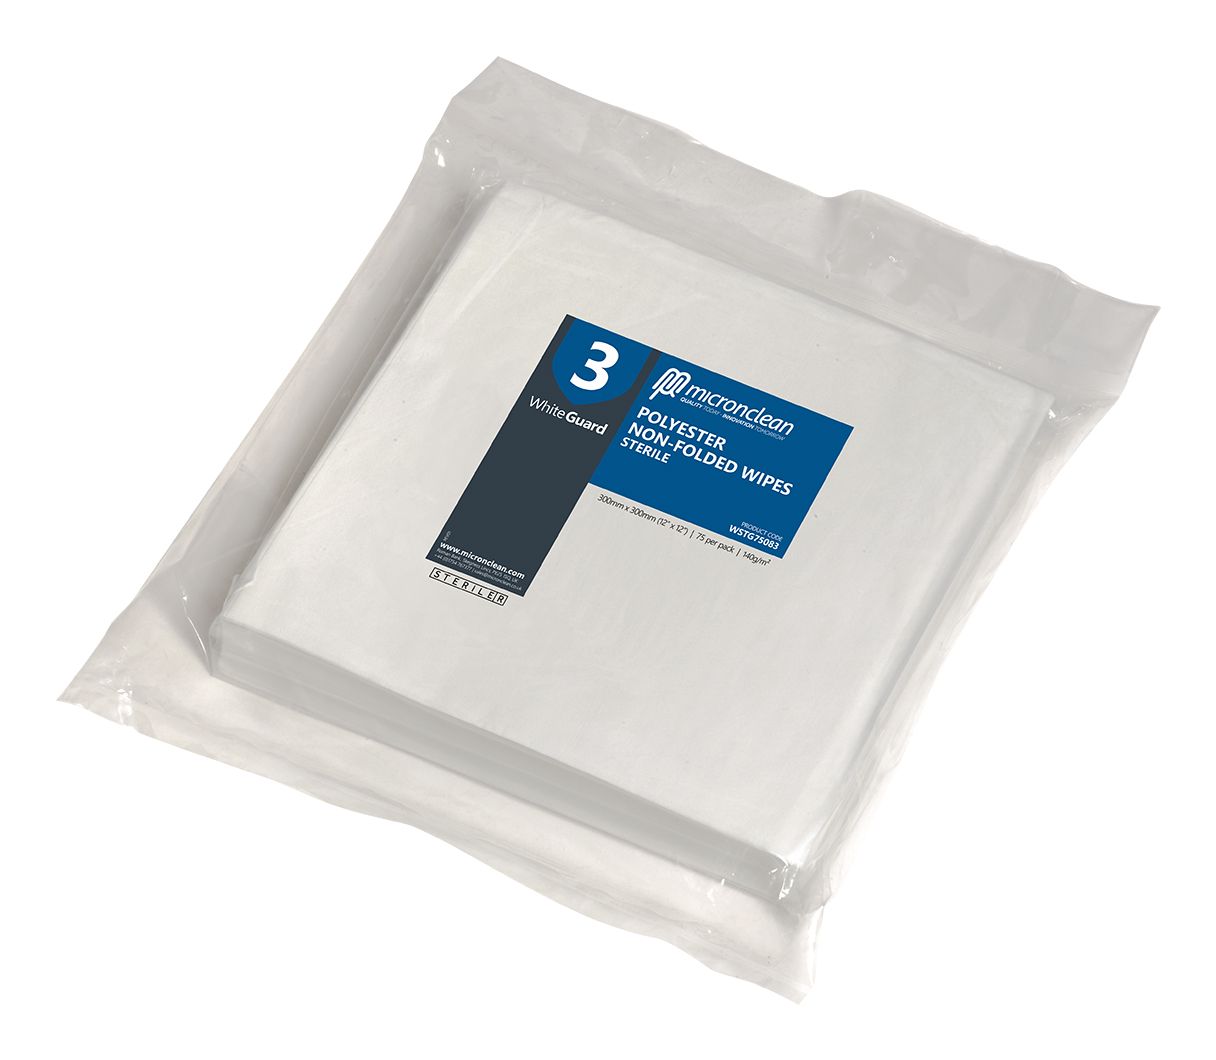 WhiteGuard 3 Laundered Polyester Wipes Non-Sterile [ROW]